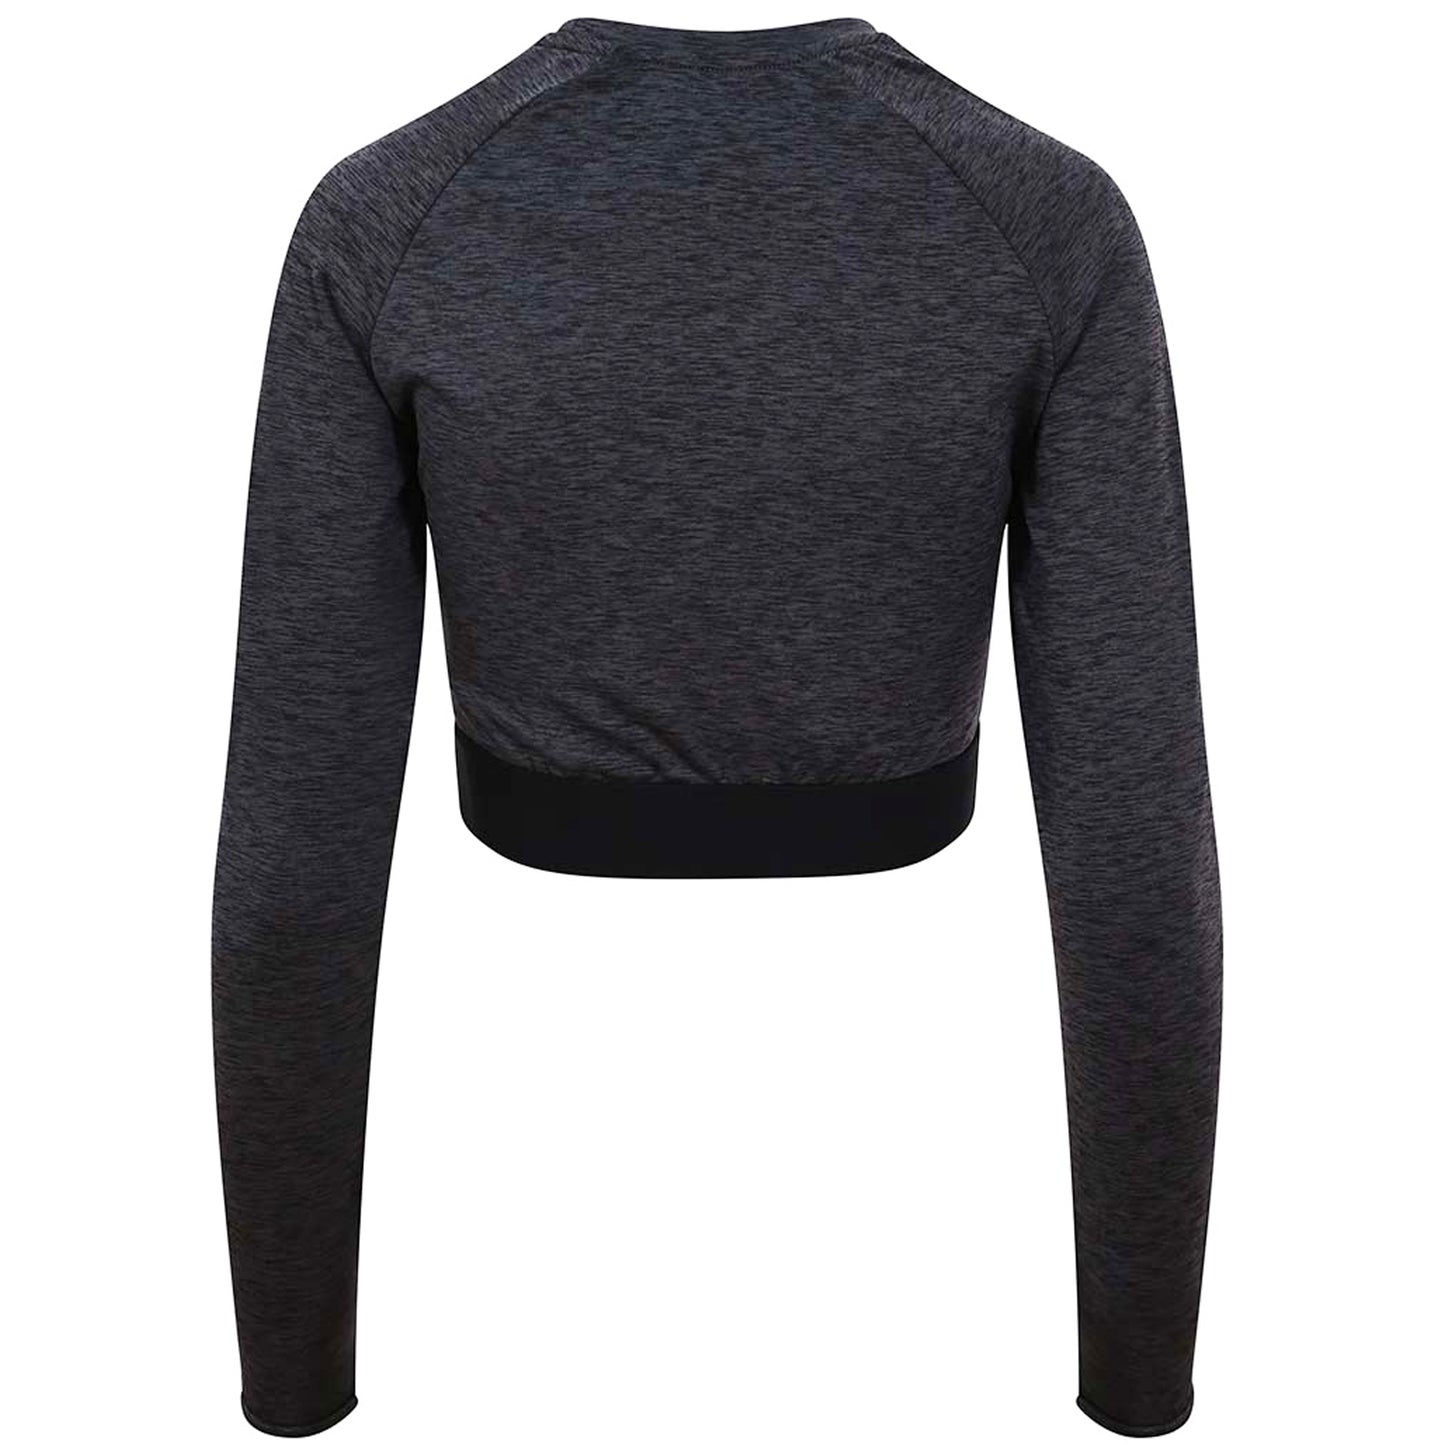 LUCY - "Cool" Technology Long Sleeved Crop Top - Charcoal